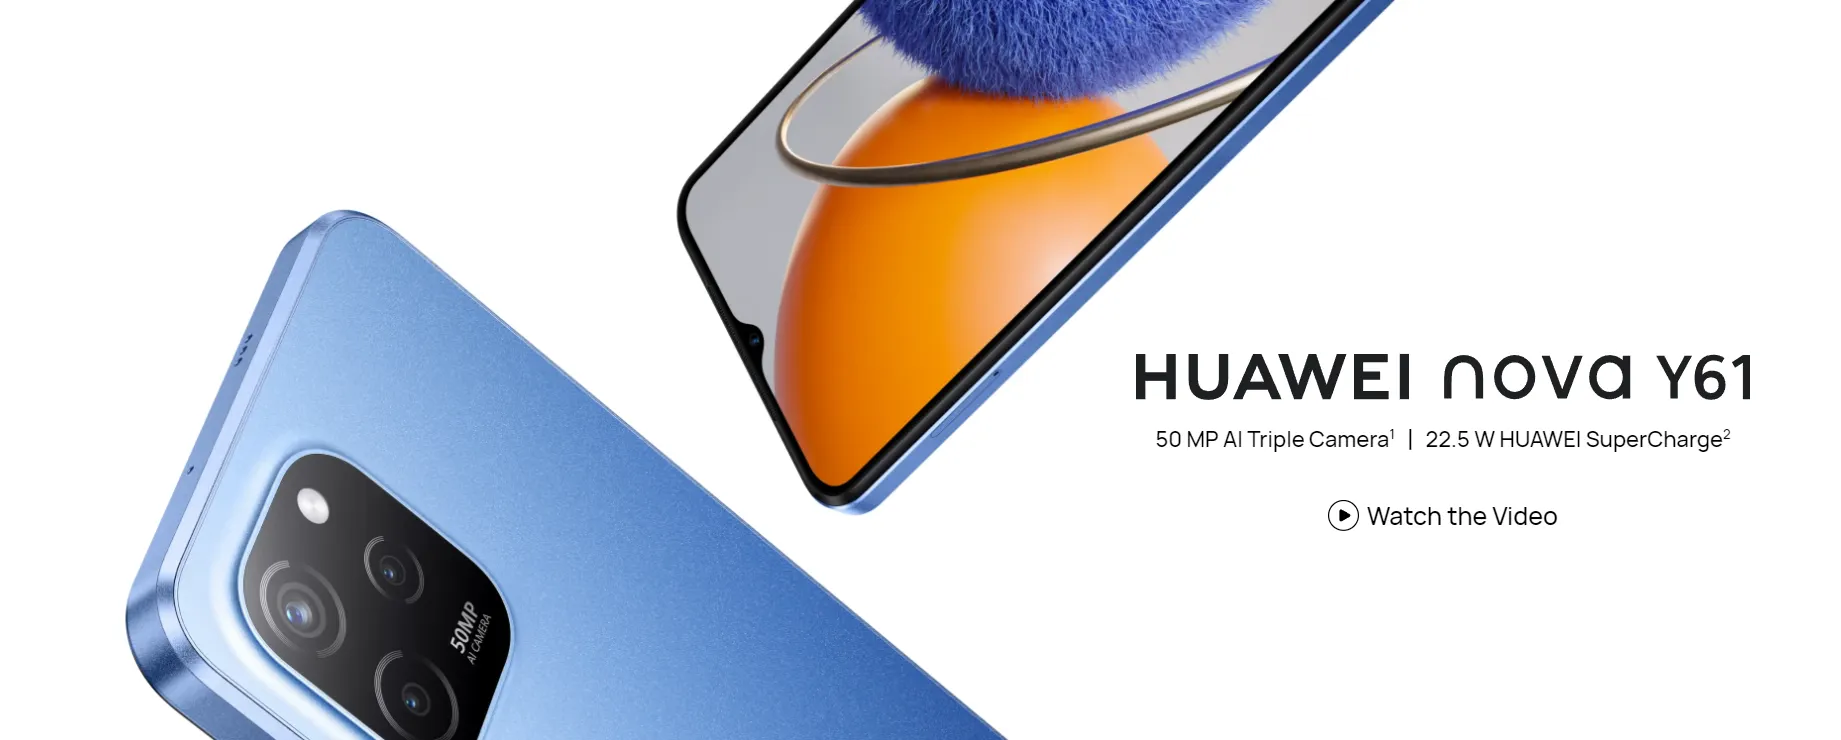 Huawei nova y61 featured poster